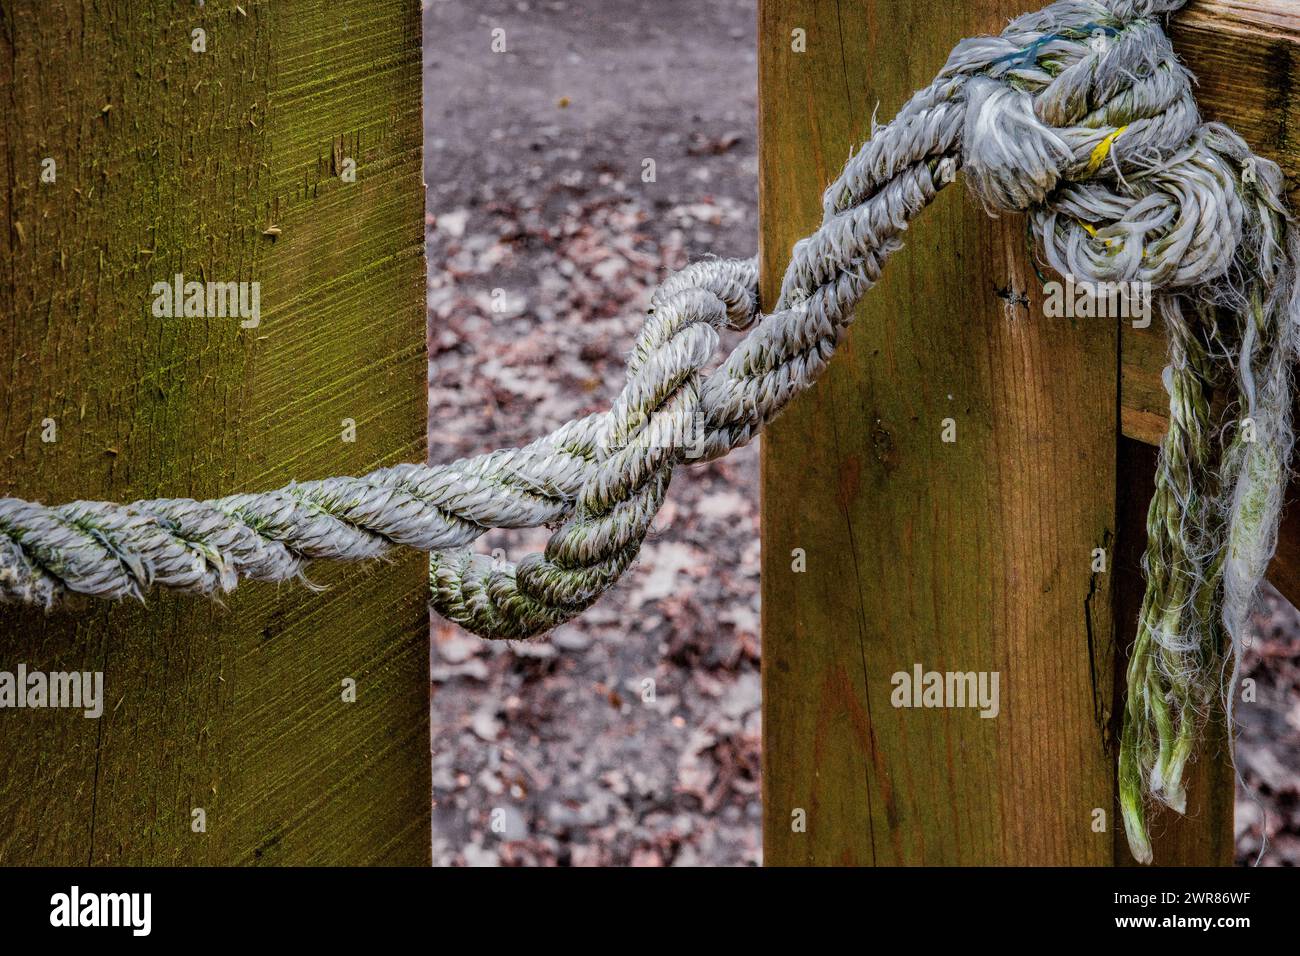 Knotted rope holding a country gate closed. Concepts, closed, barred, security, safety, prevention, mental issues, textures. Stock Photo